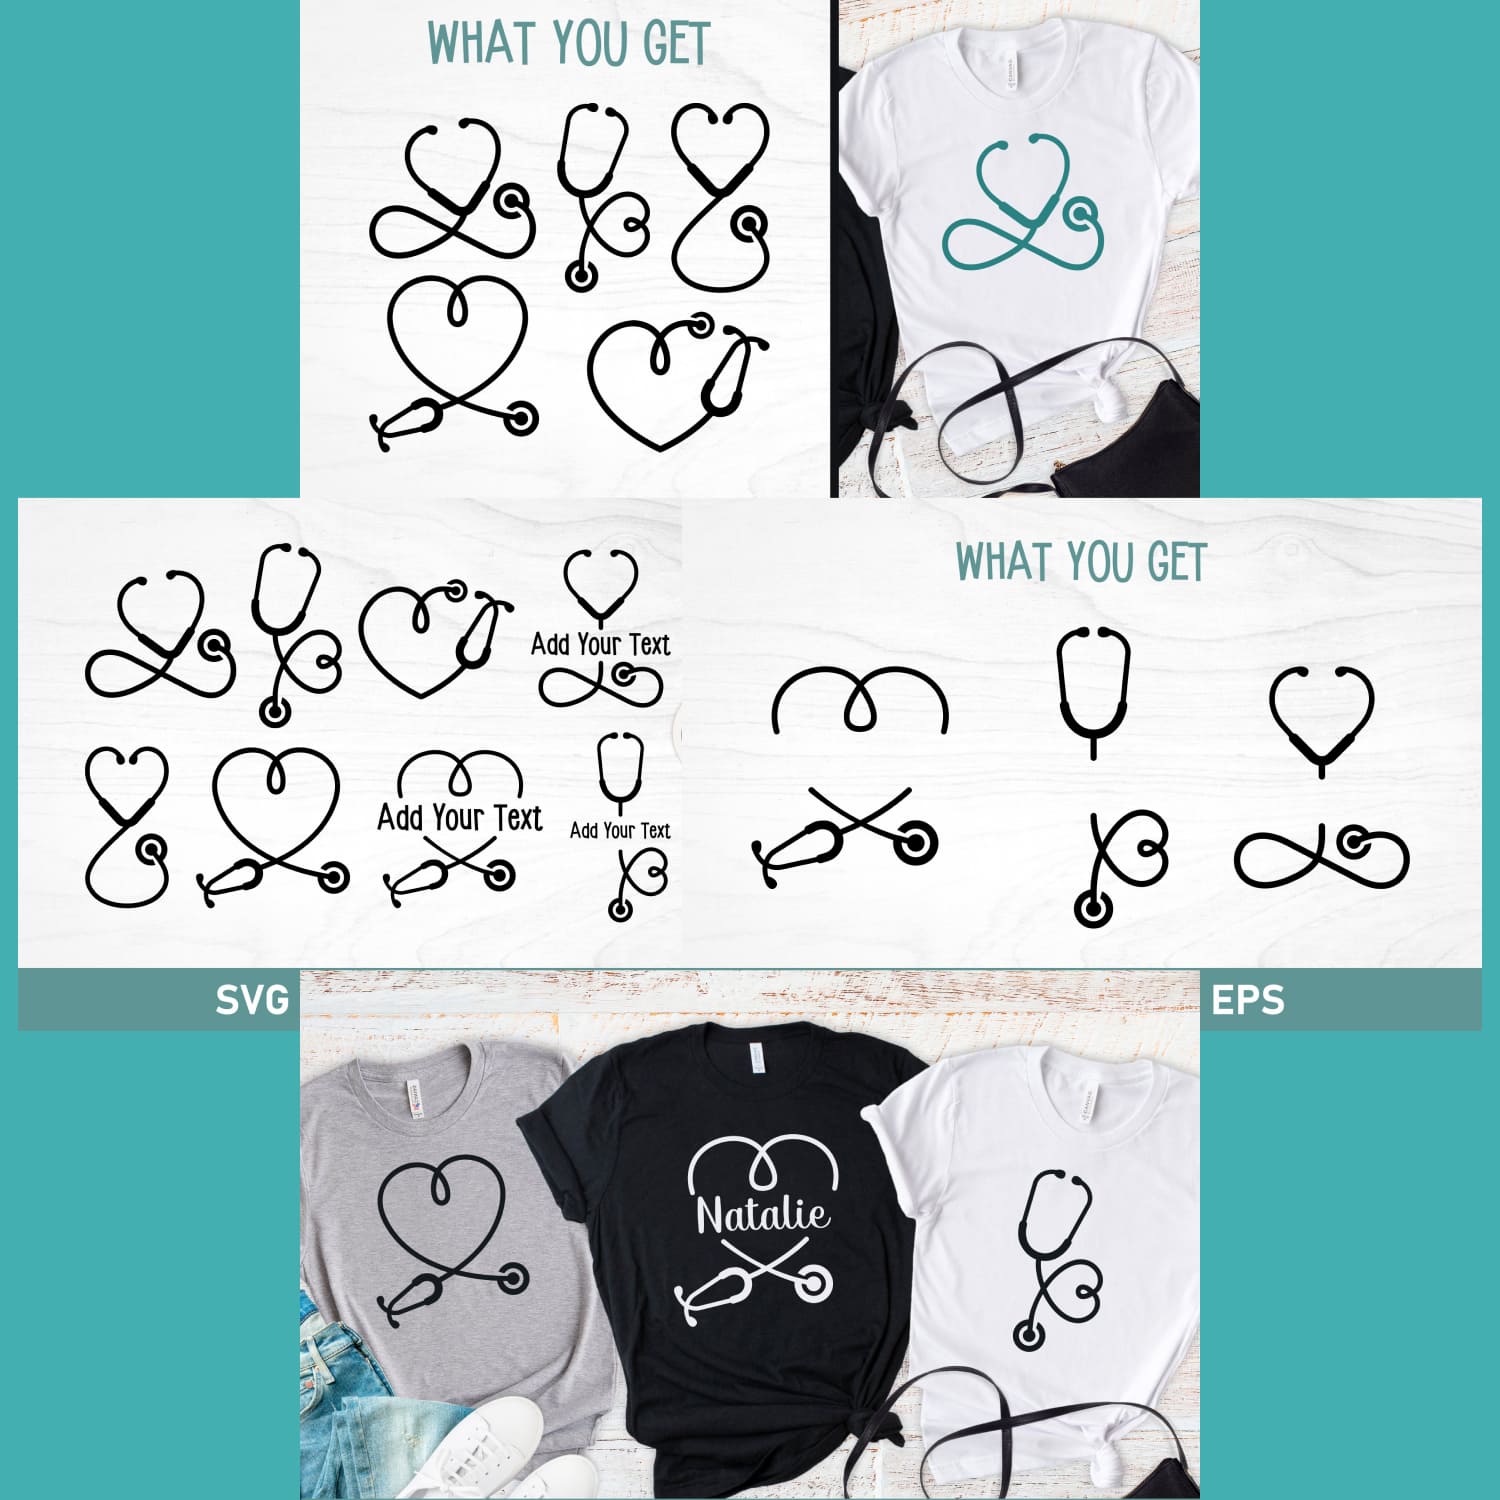 Stethoscope SVG With Heart Mini Bundle cover.